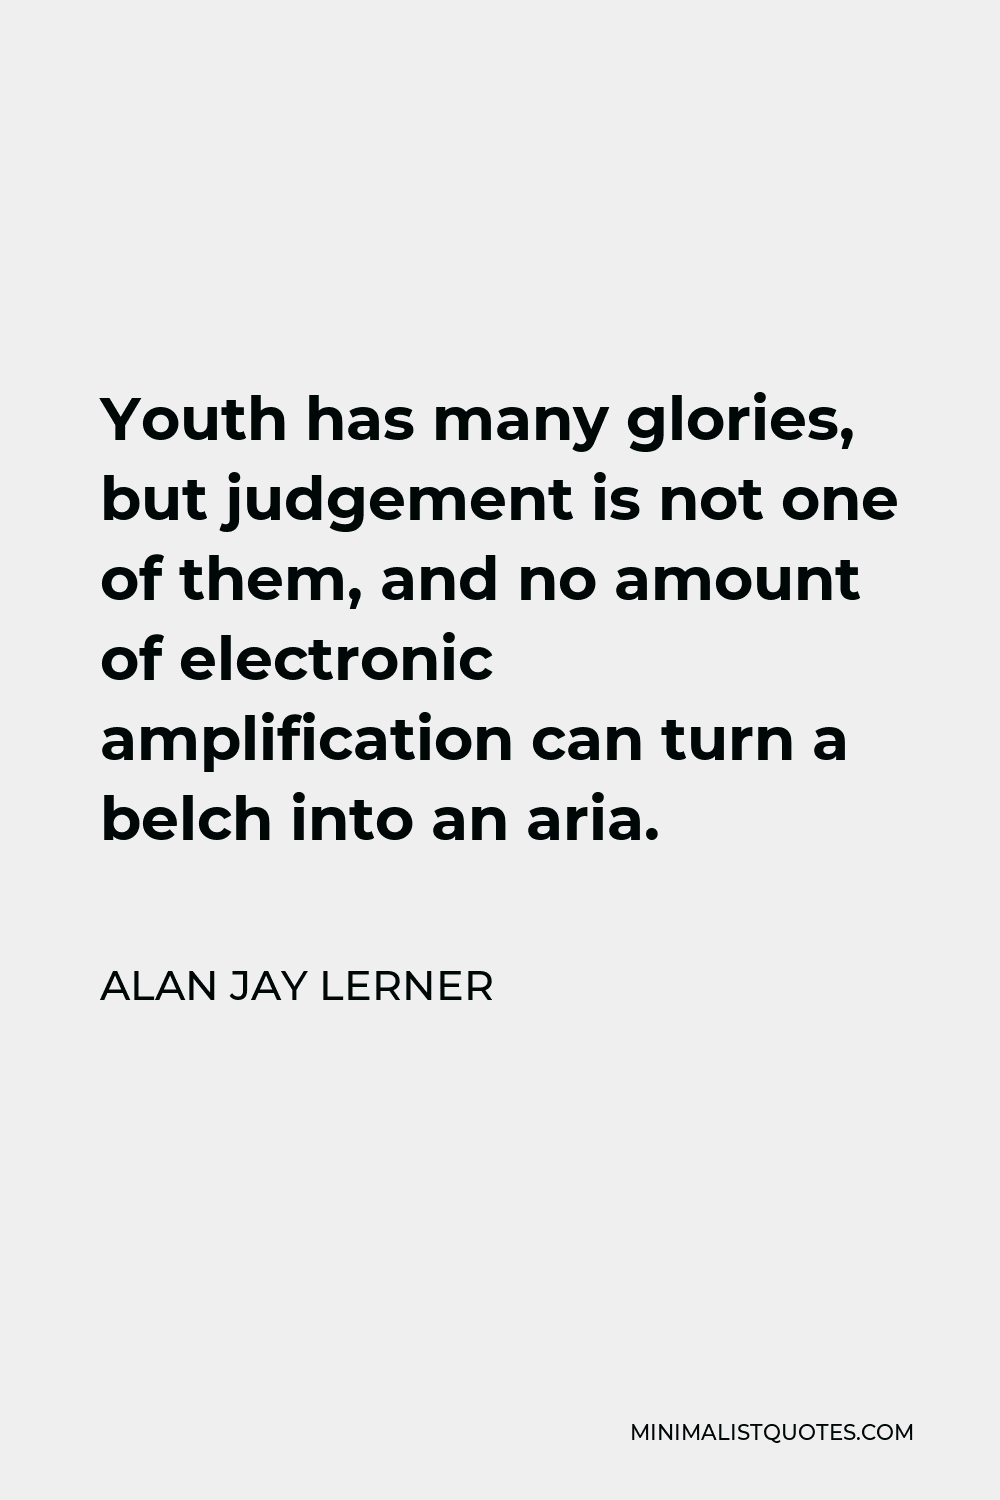 Alan Jay Lerner Quote - Youth has many glories, but judgement is not one of them, and no amount of electronic amplification can turn a belch into an aria.